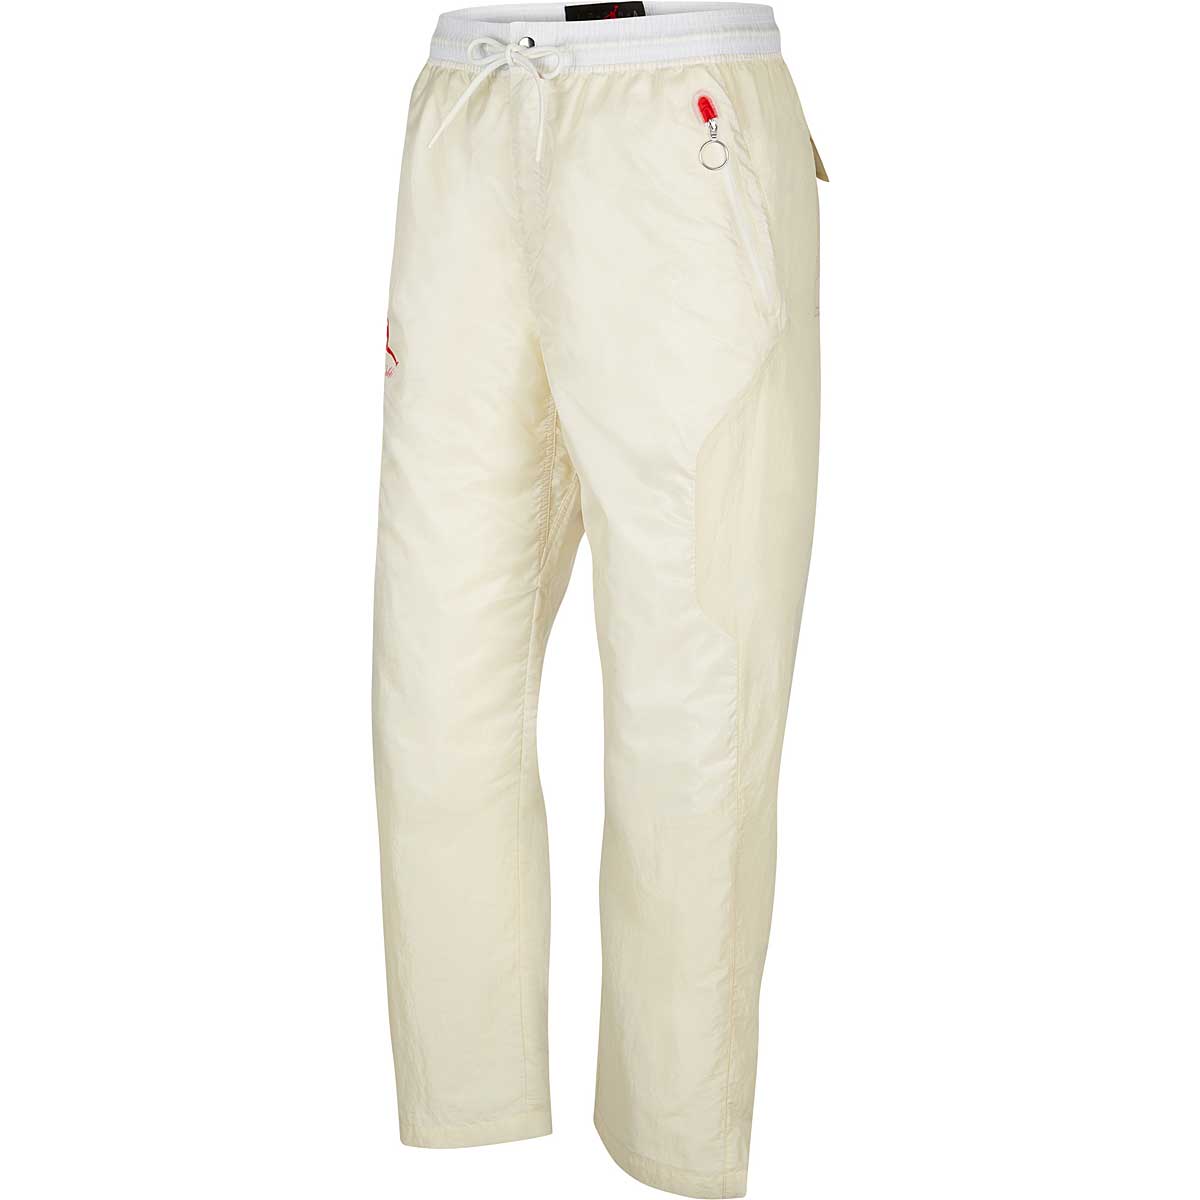 off white chino pants Big sale - OFF 67%